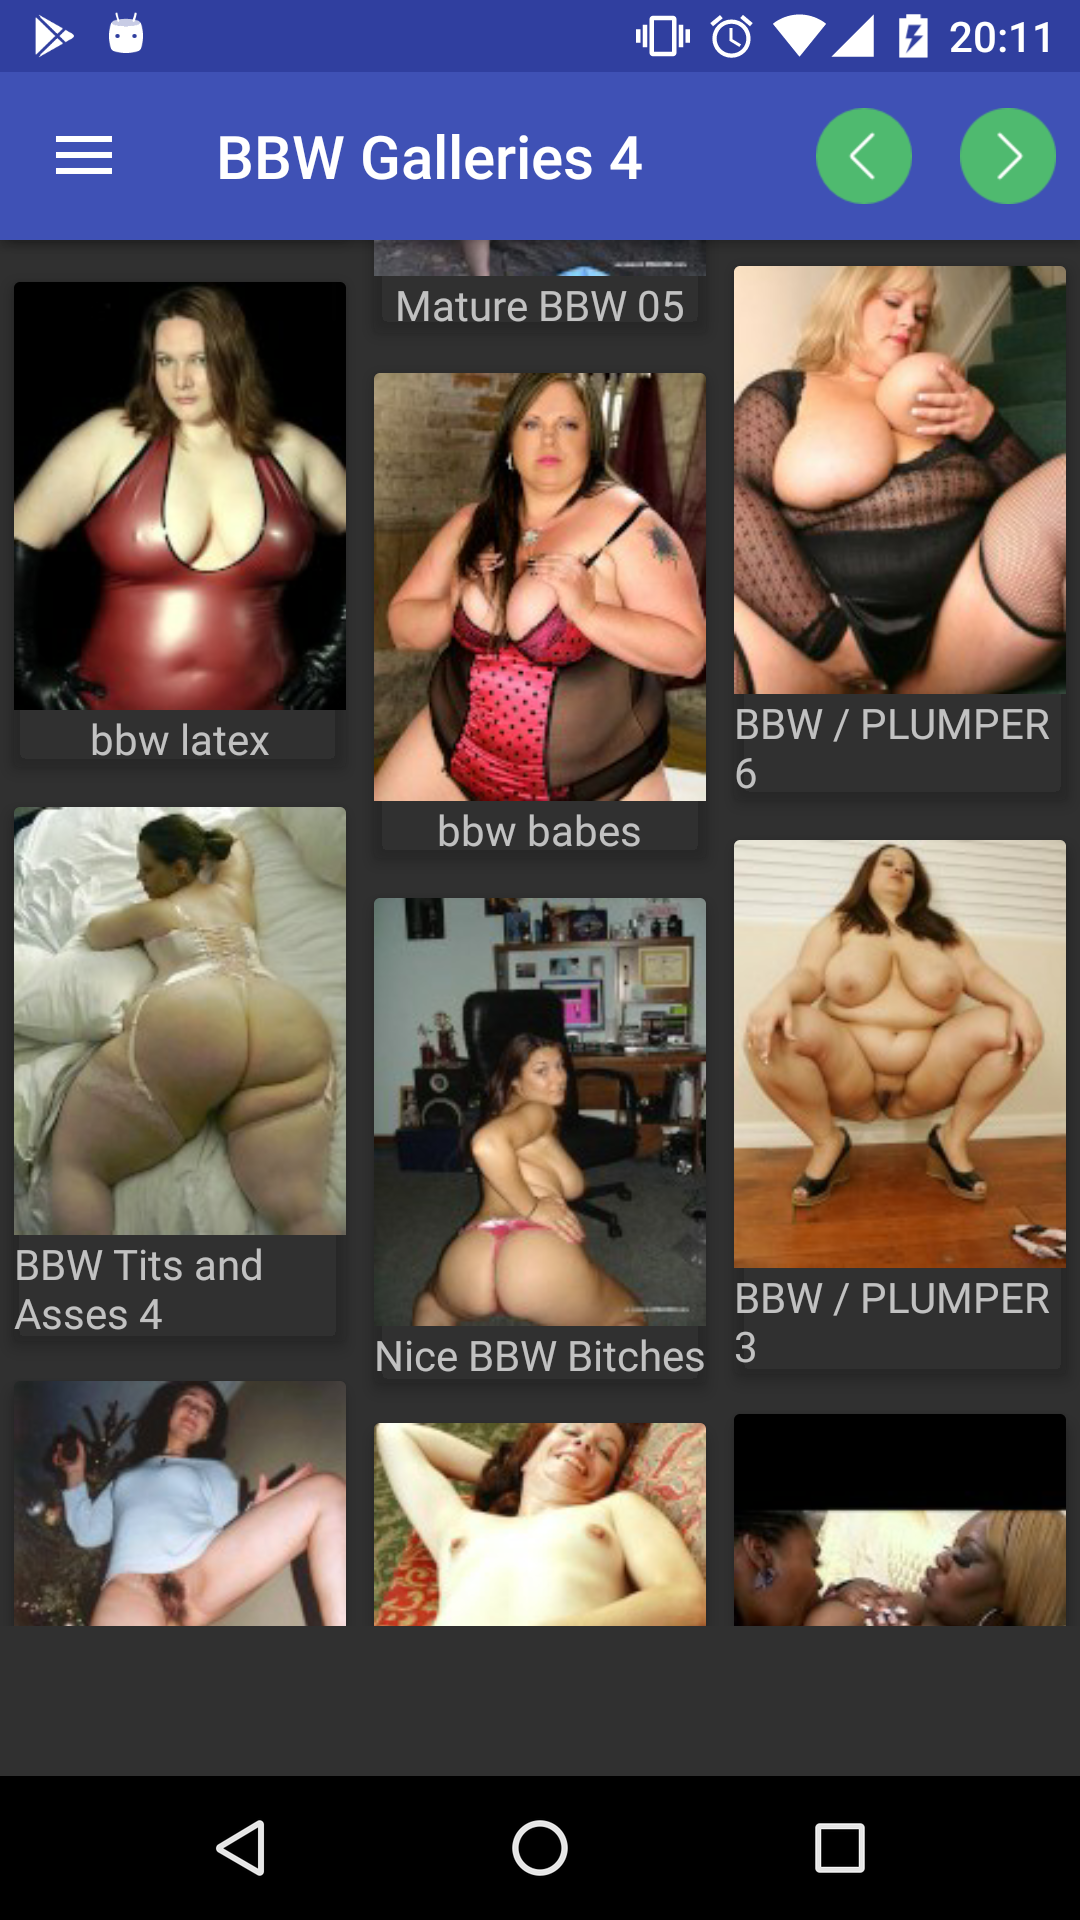 BBW Girls hentai,oictures,fatty,android,photos,pics,caprice,girls,pic,how,good,pornstars,amateurs,bbw,sexy,apps,hot,wallpapers,chubby,download,galleries,for,hentia,app,best